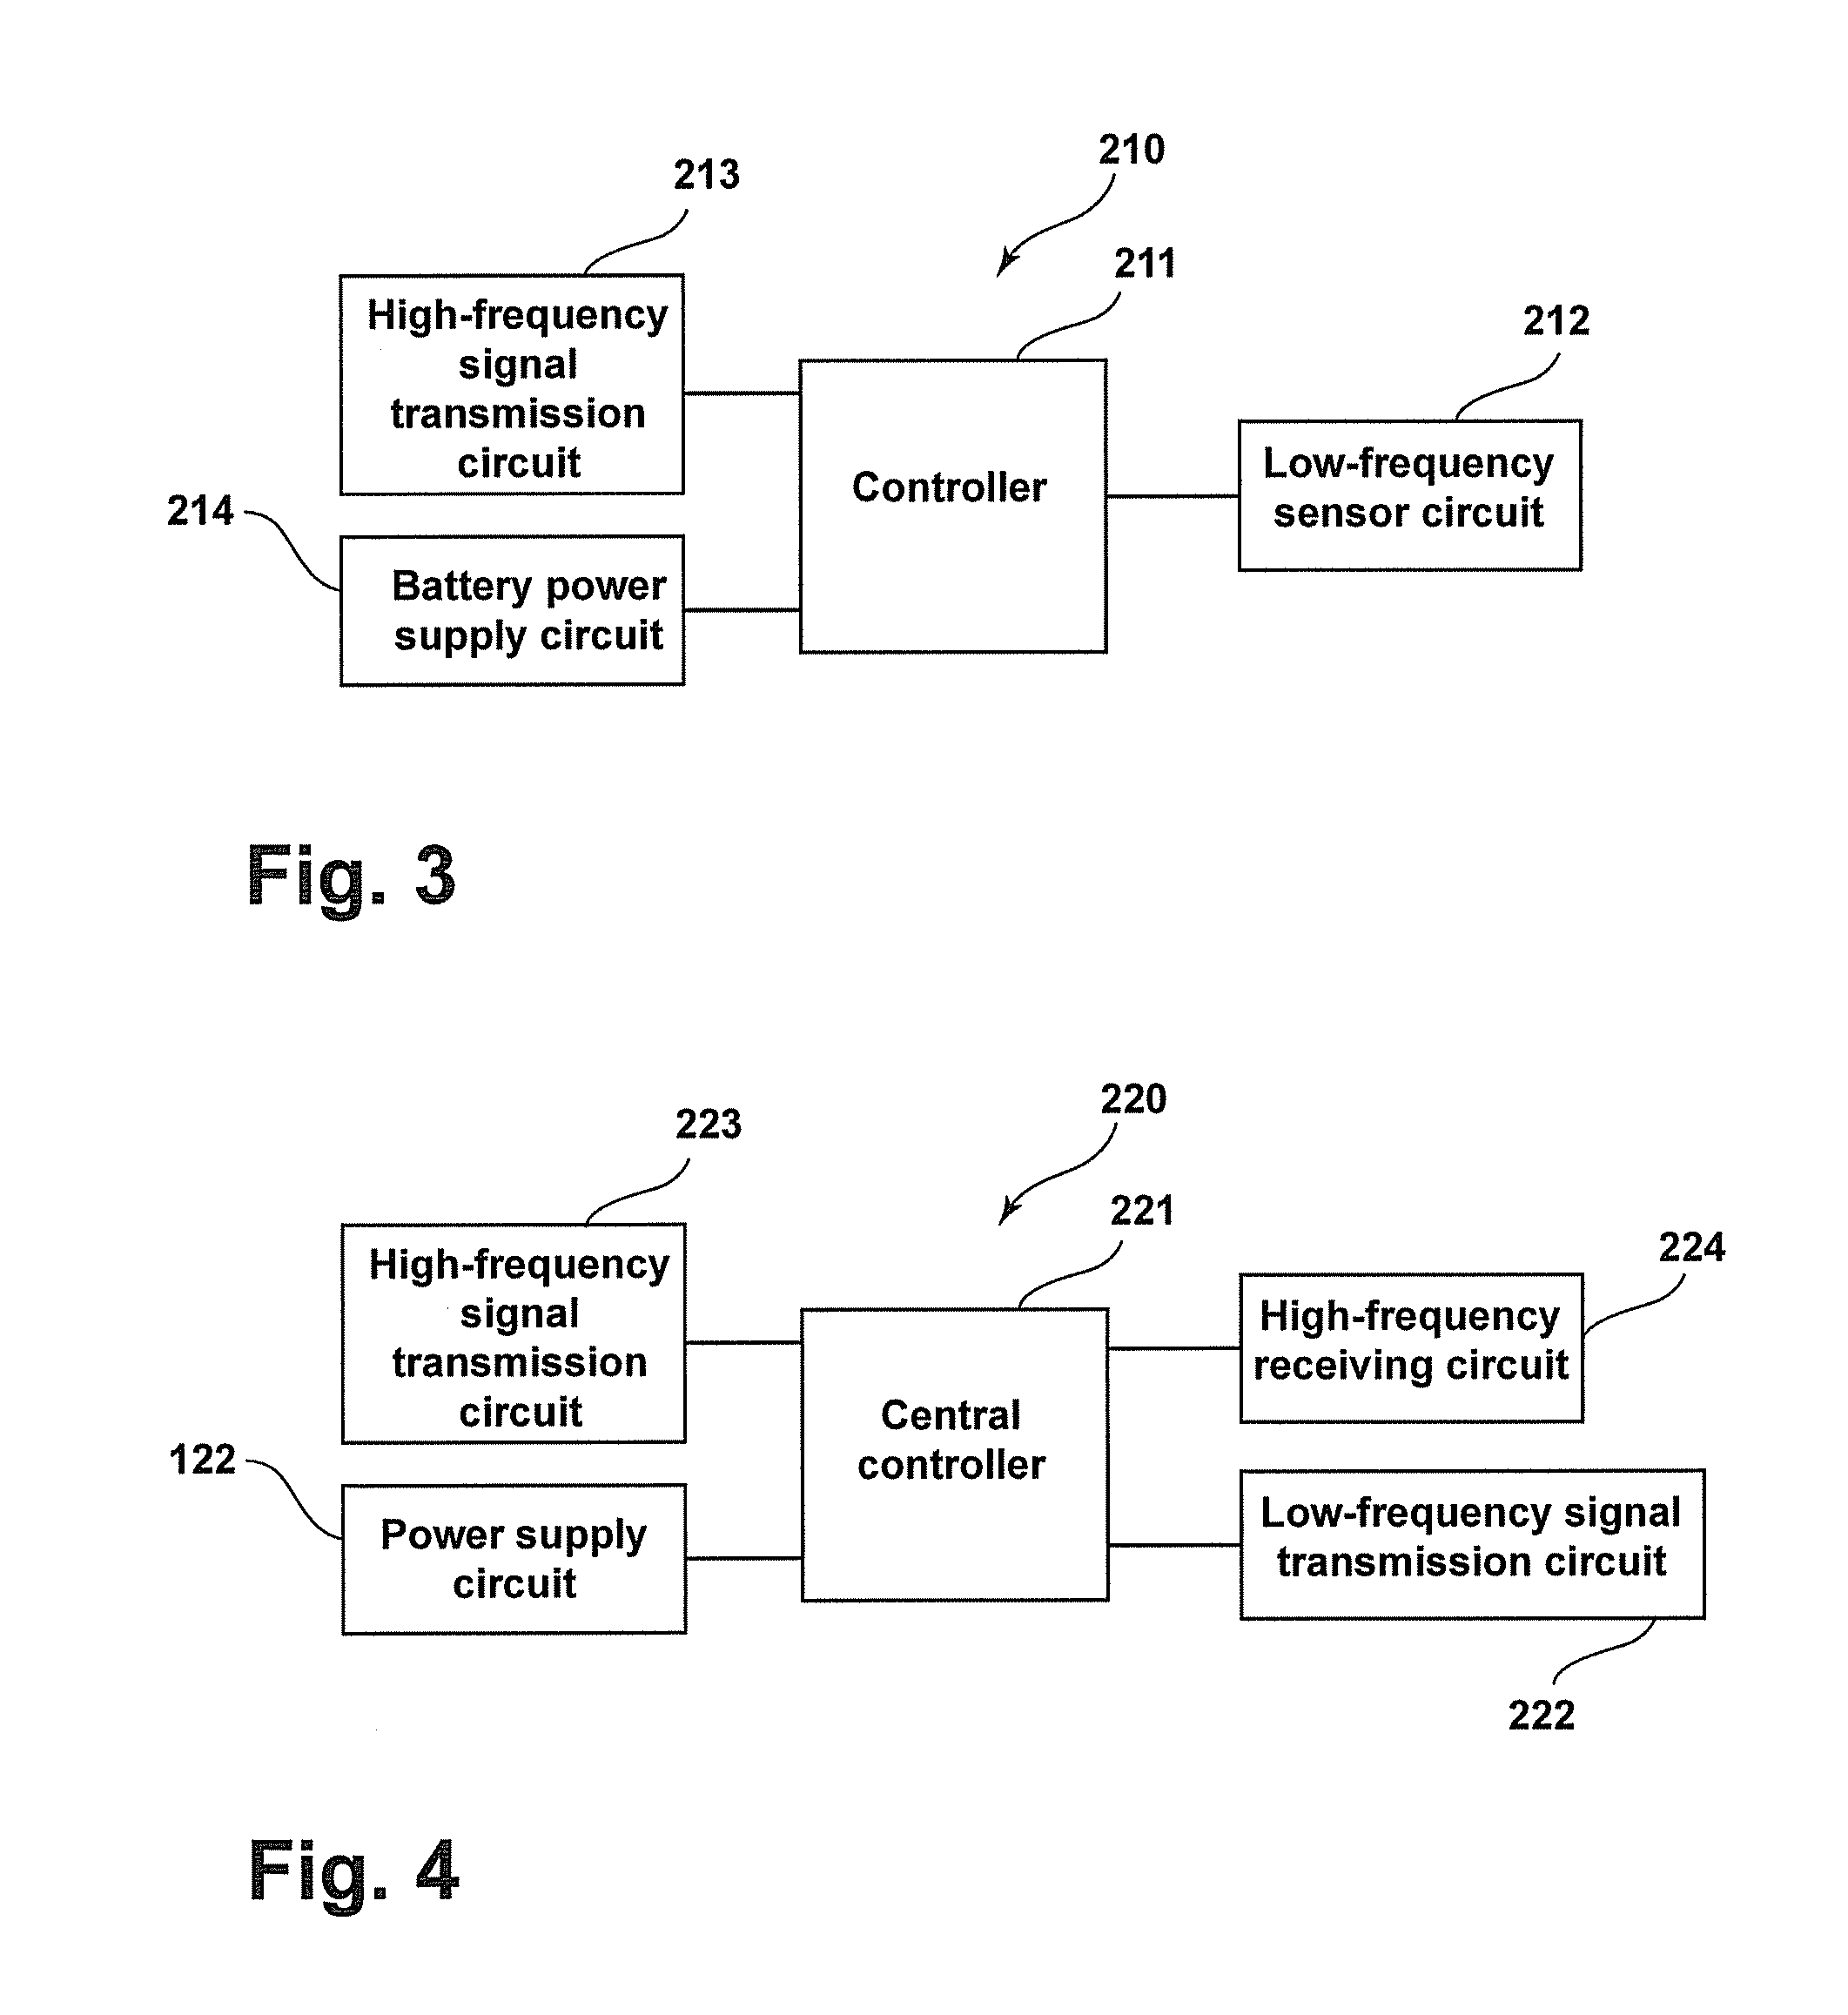 Automatic networking apparatus and system for vehicles